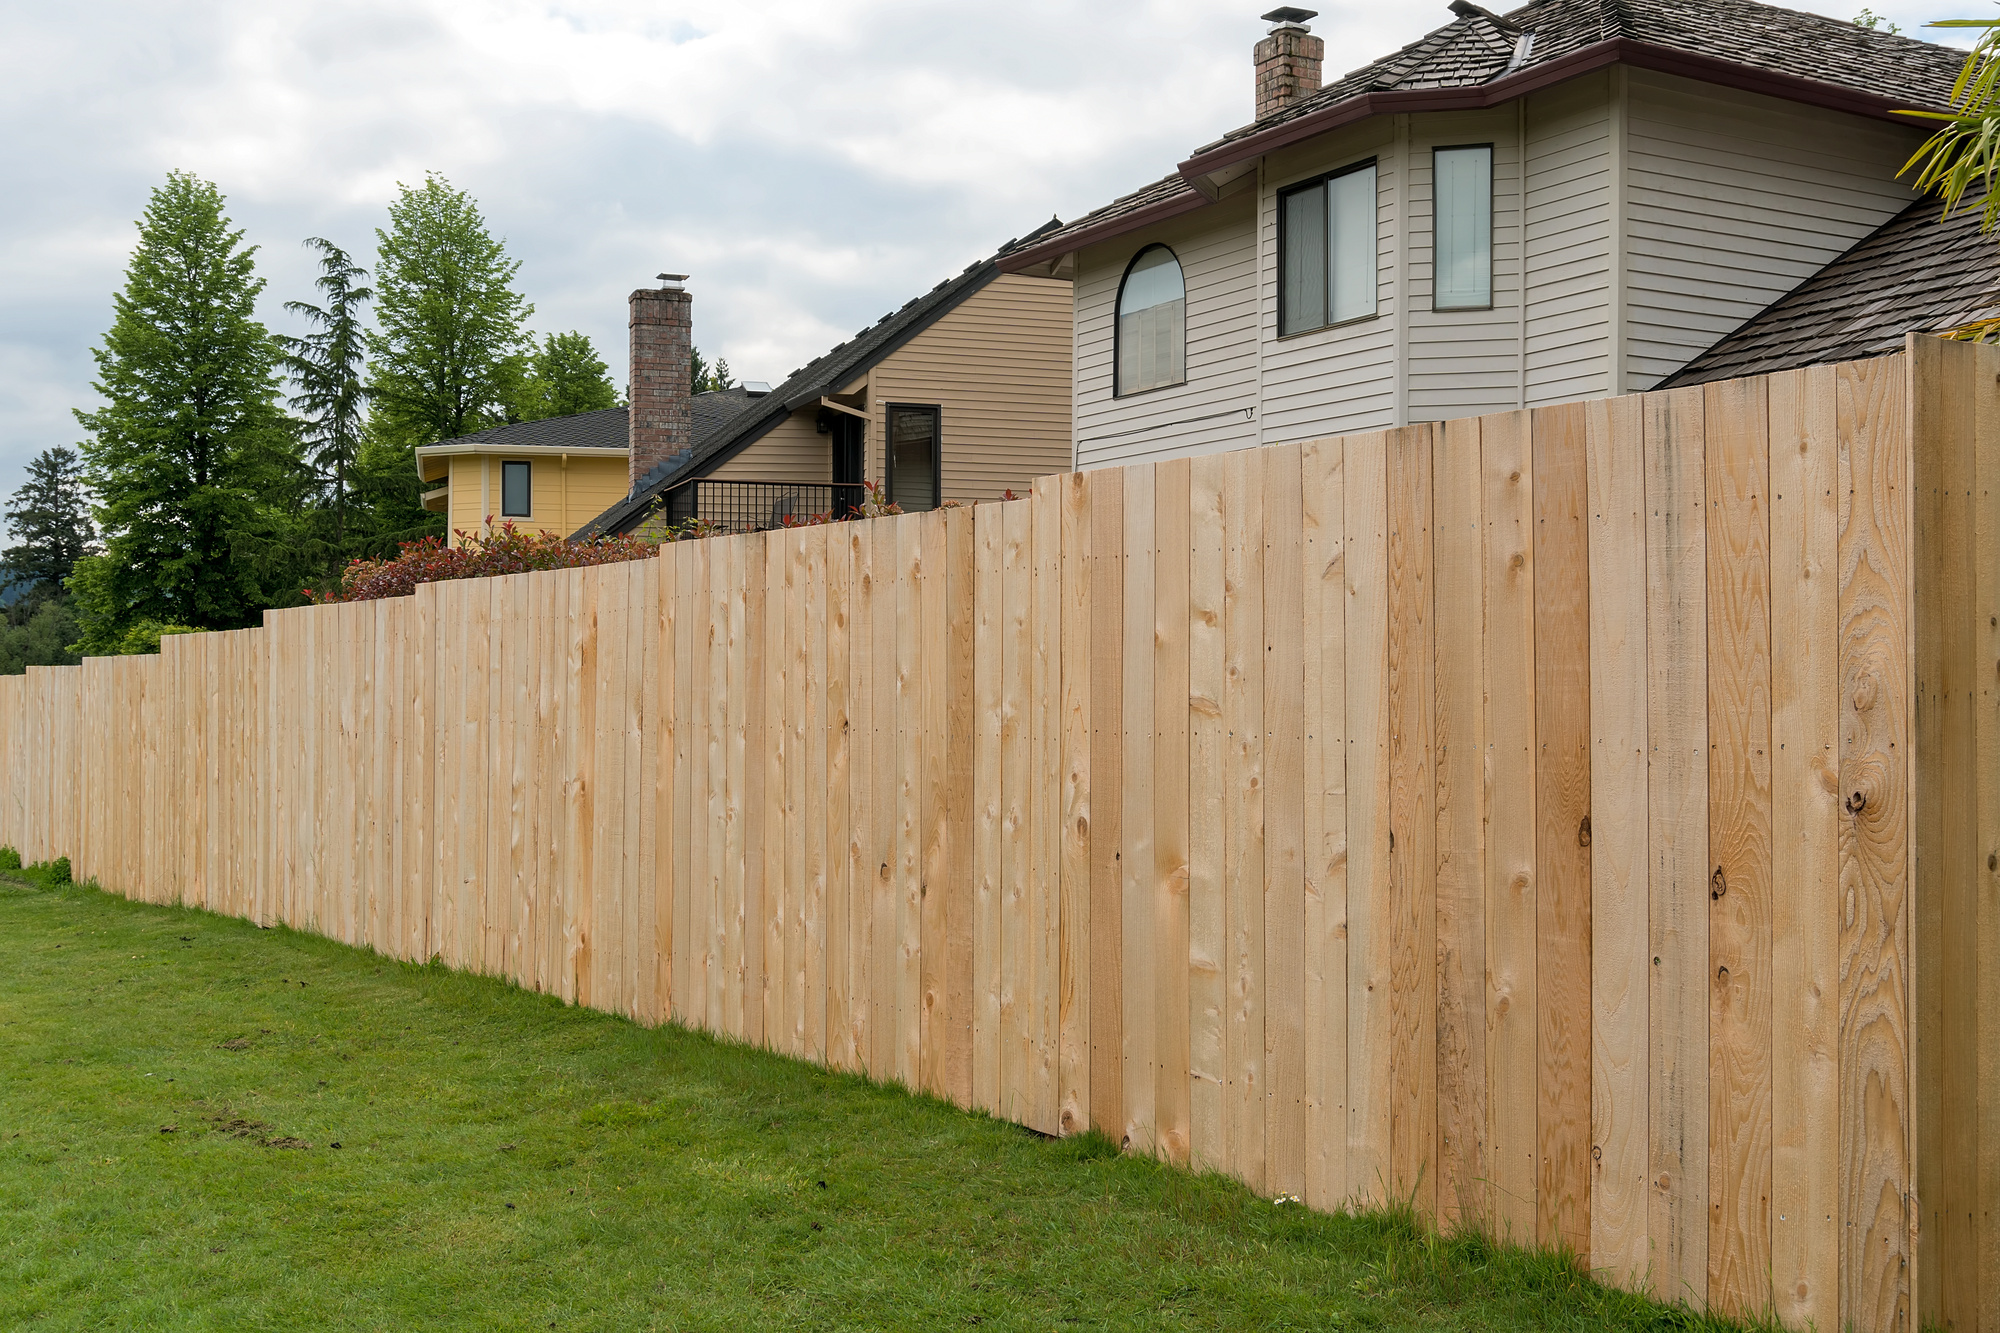 When it comes to installing a new fence at your home, explore the differences between a vinyl and wood fence when deciding which material is best for you.